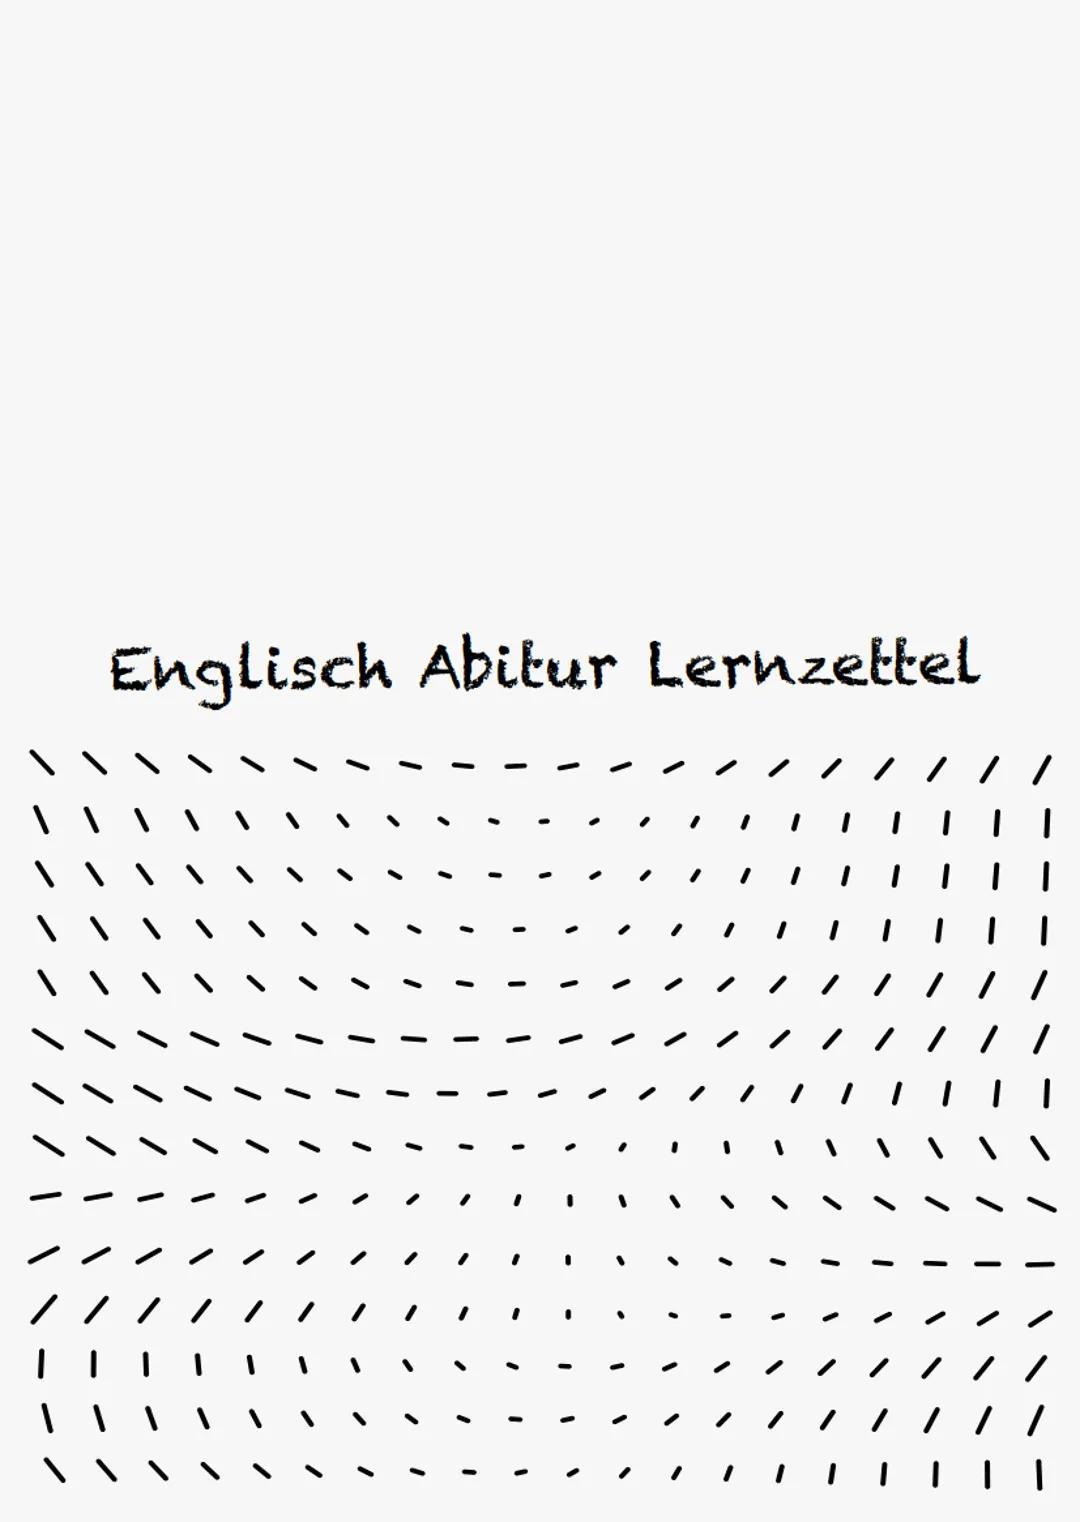 Englisch Abitur Lernzettel aims & abitions
- stay healthy
- have a family
- pass the A-level
- find a job
- do more for the environment
- su